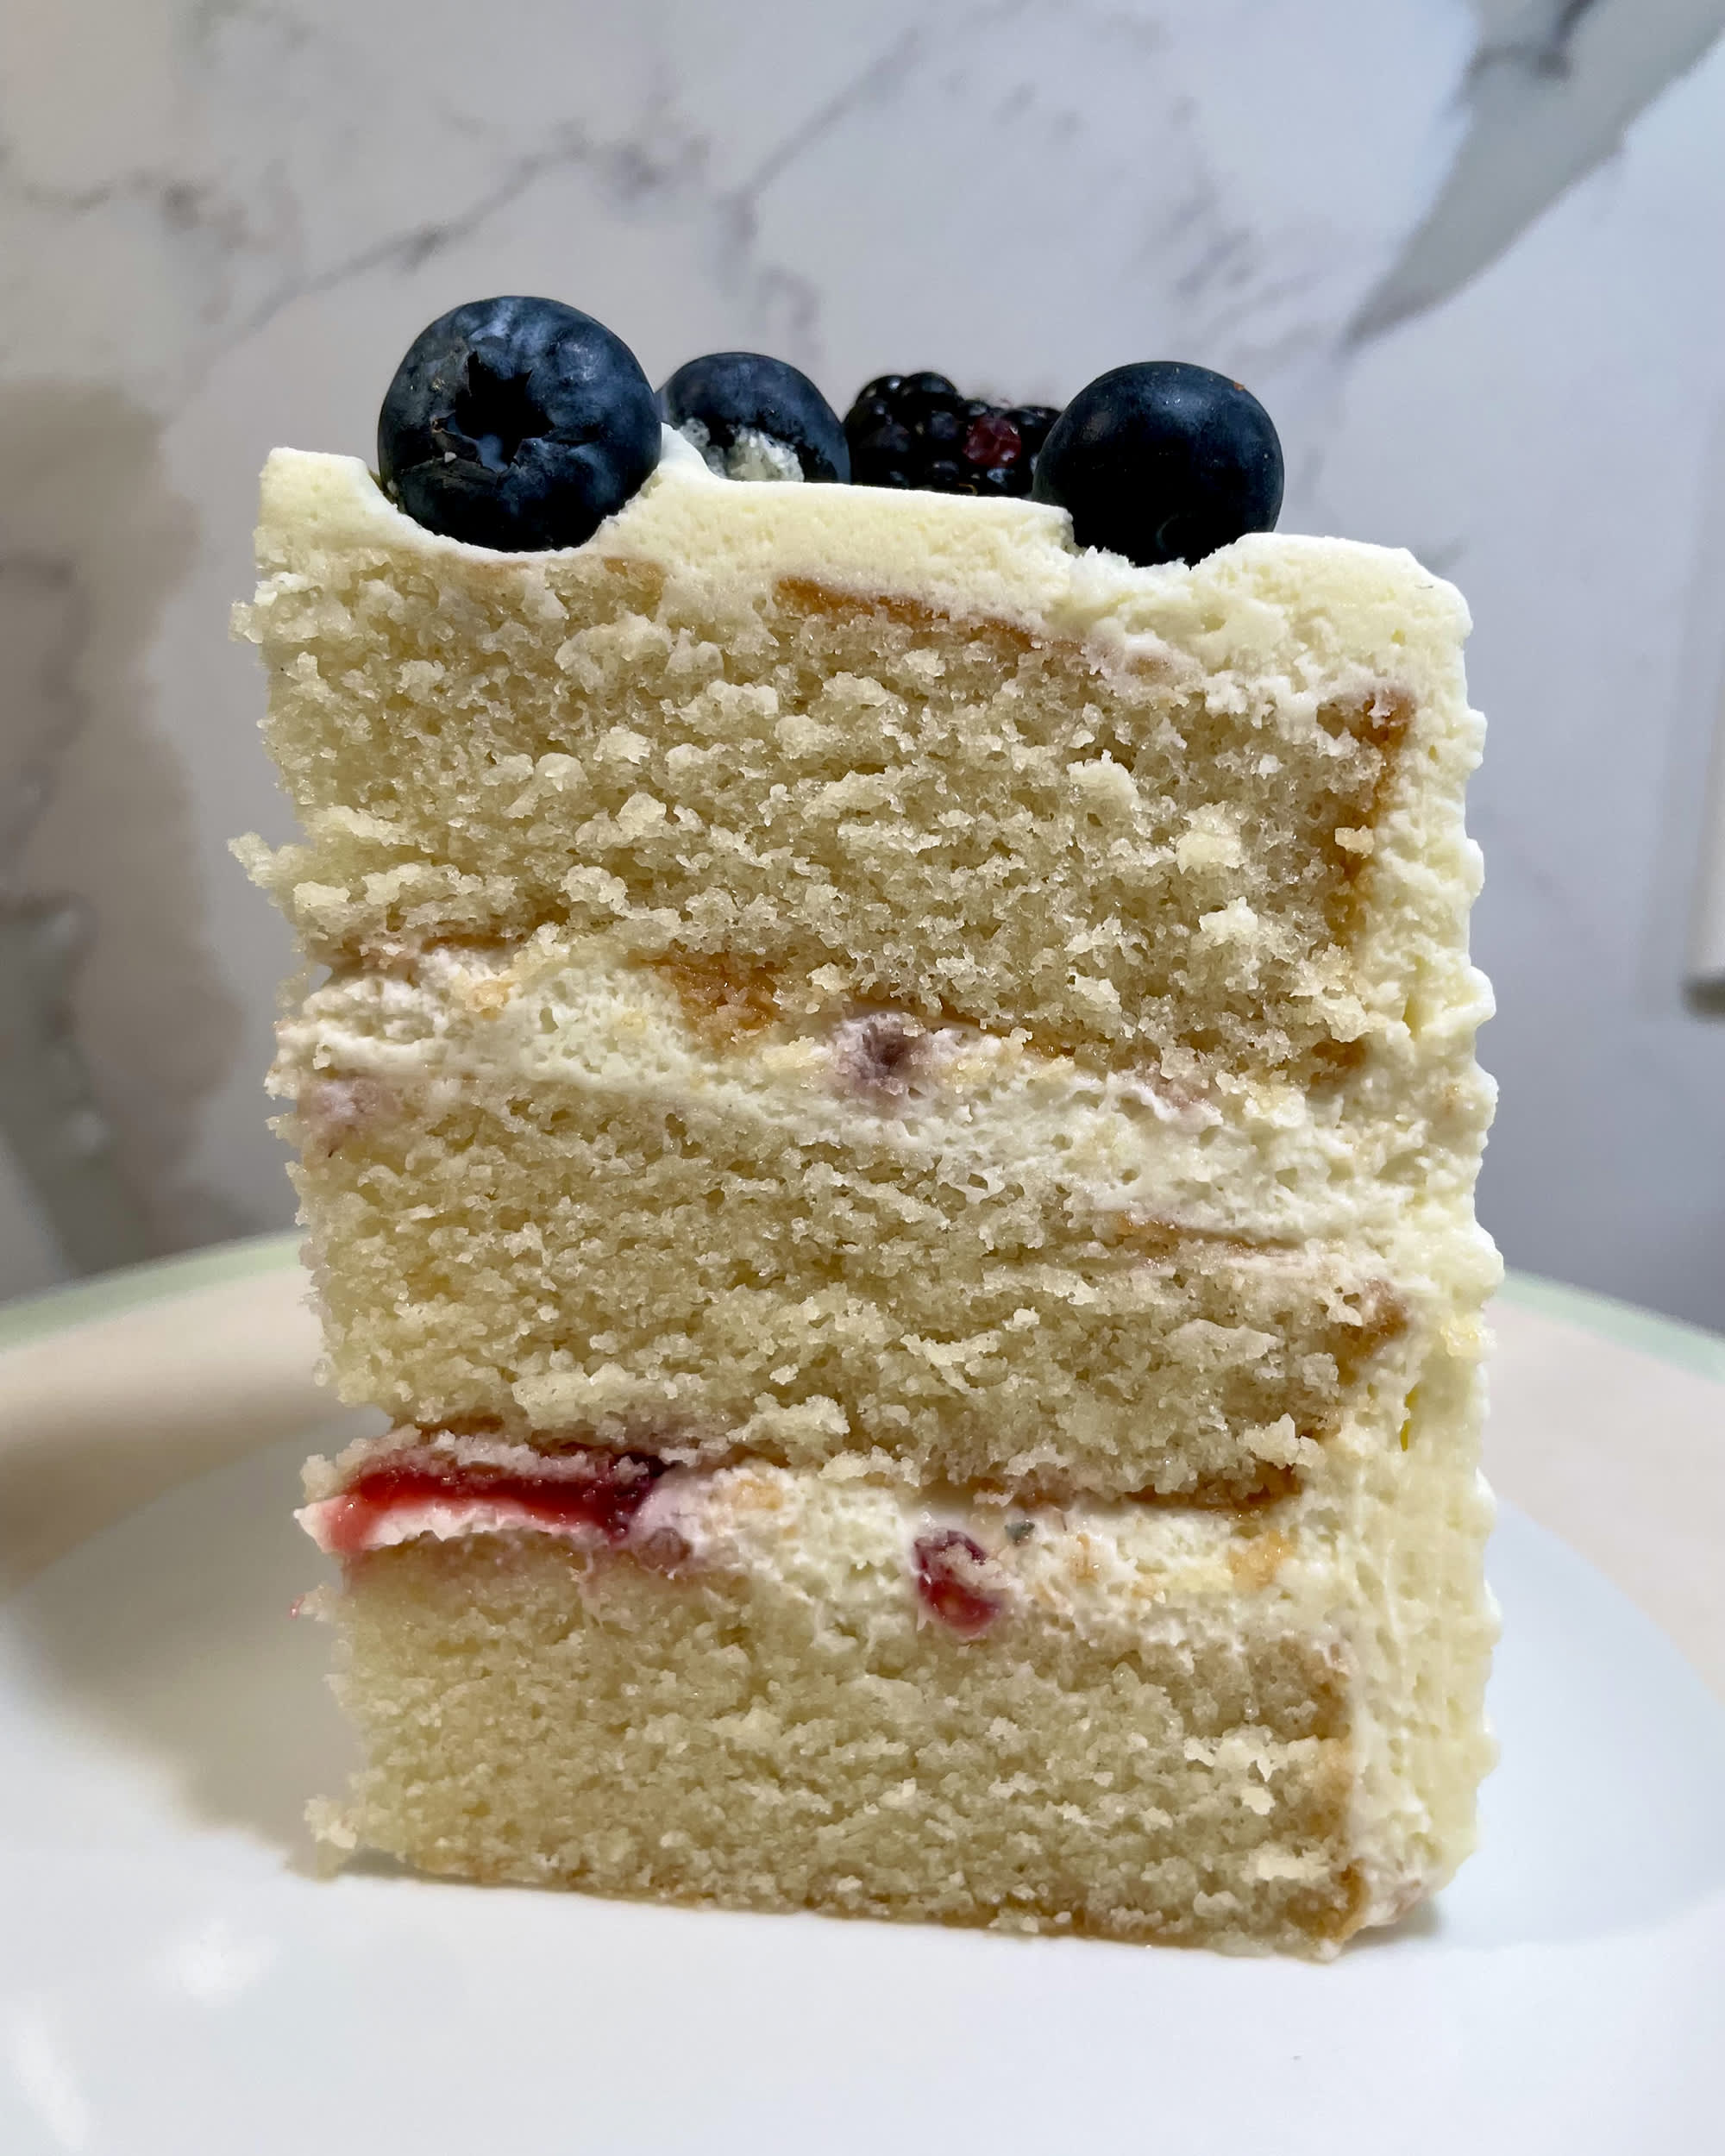 Very Berry Chantilly Cake Recipe for Entertaining – Swans Down® Cake Flour